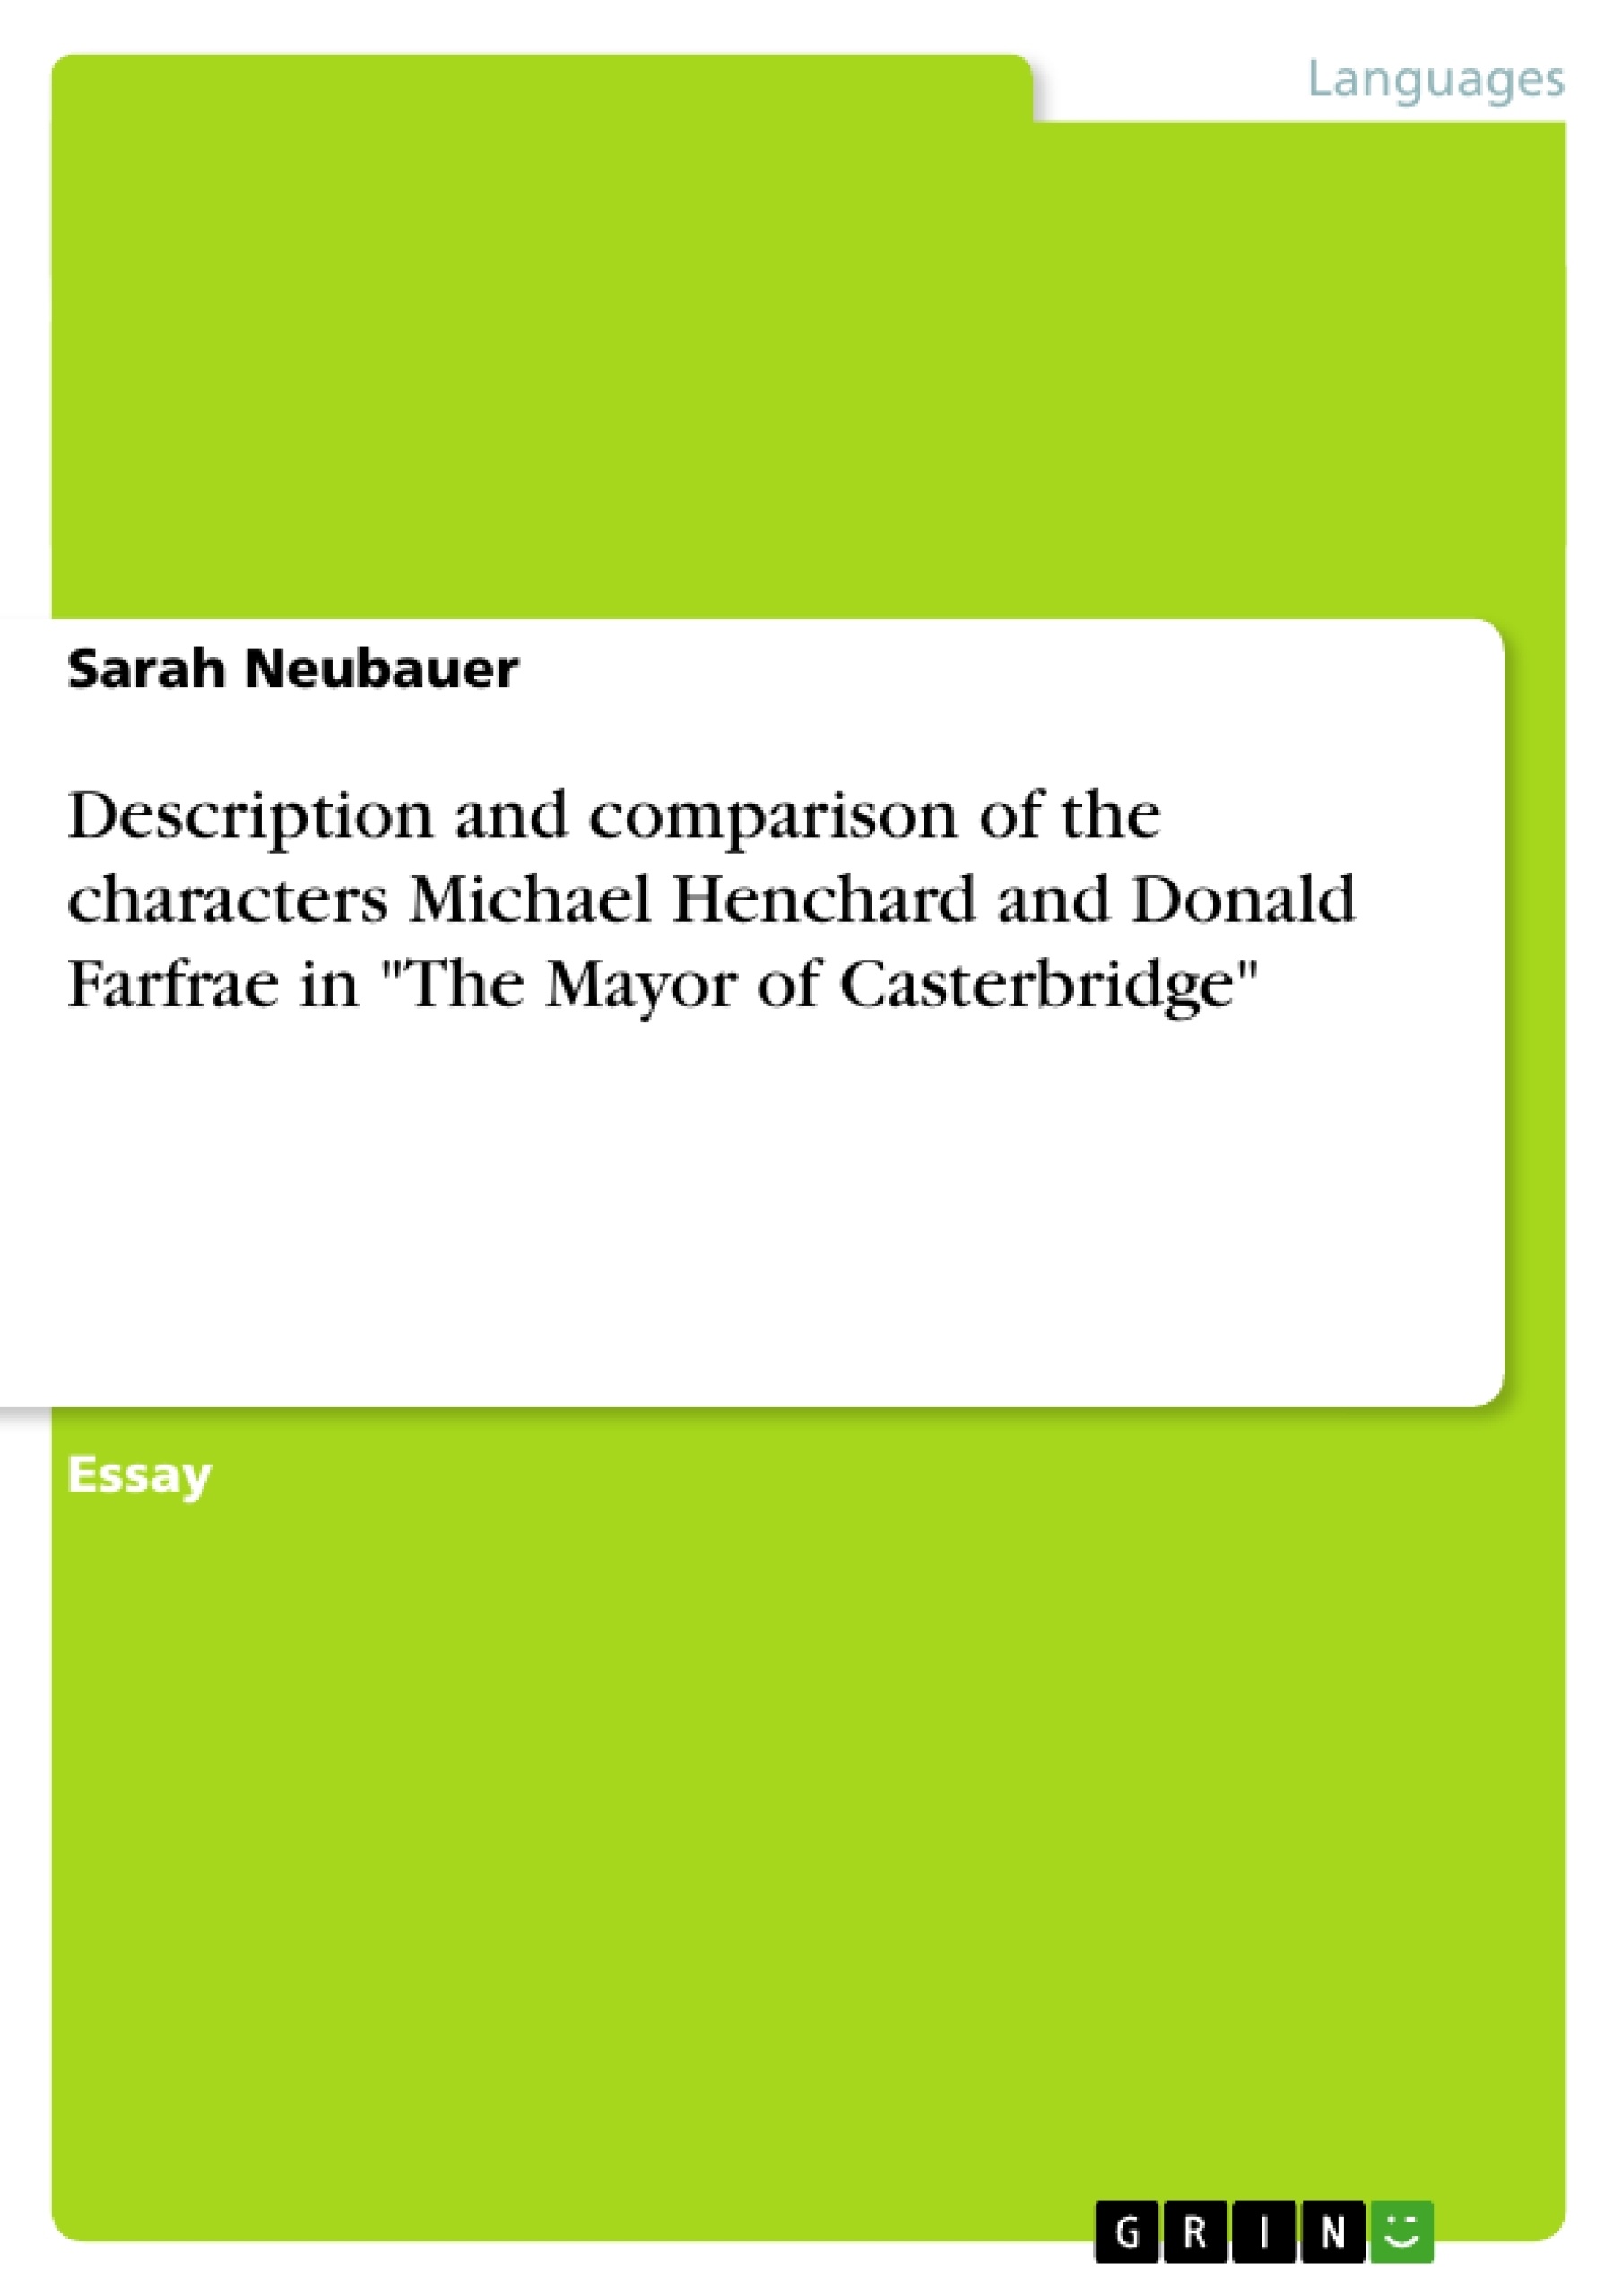 Title: Description and comparison of the characters Michael Henchard and Donald Farfrae in "The Mayor of Casterbridge"